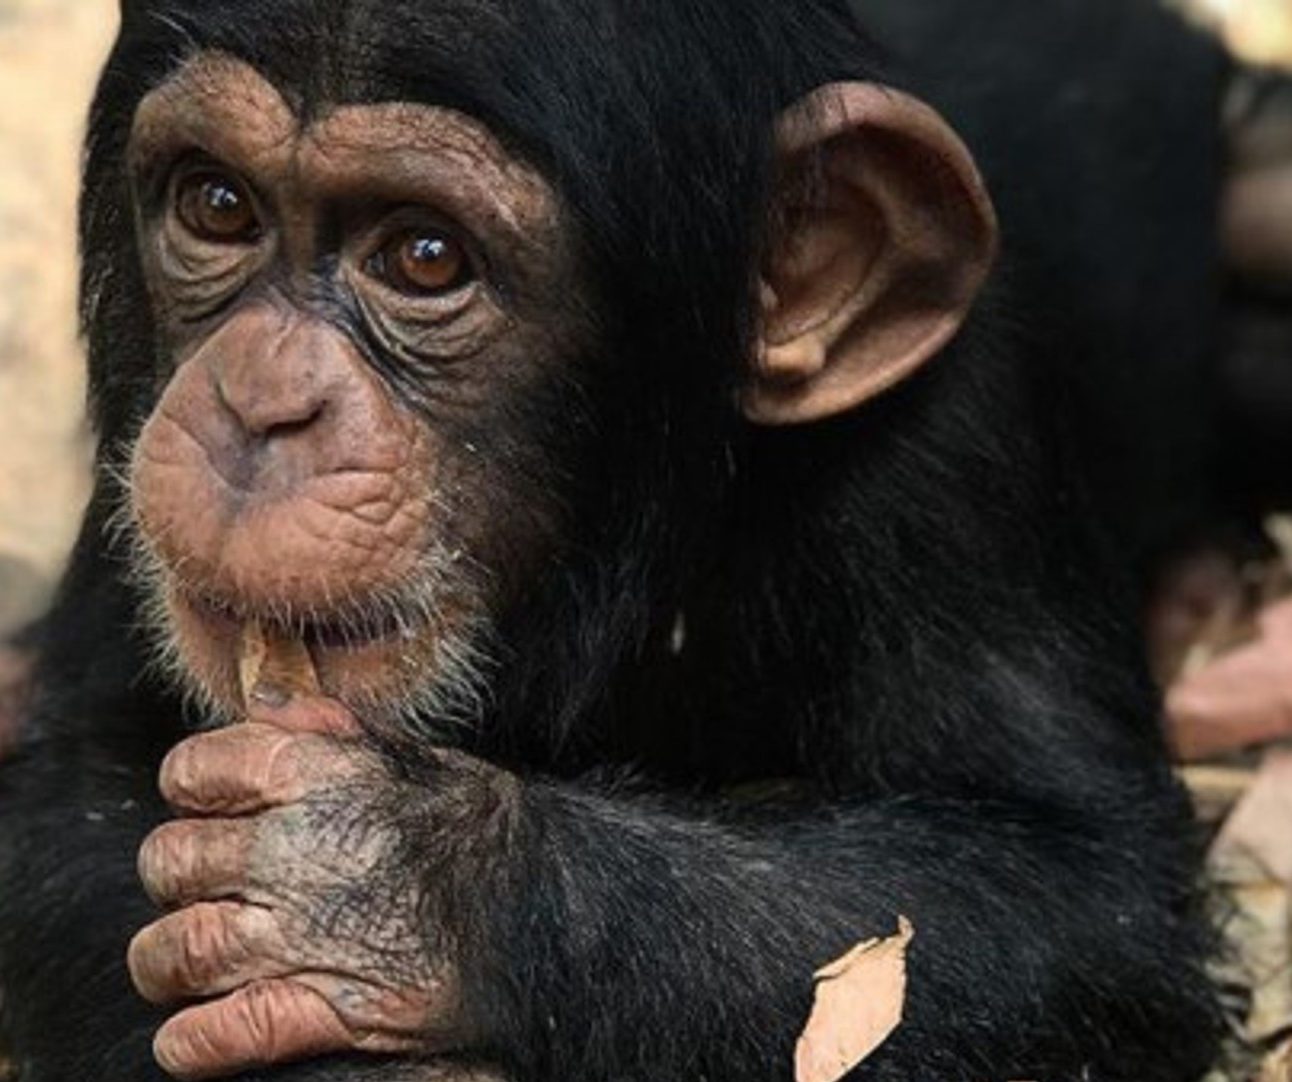 A tiny baby chimpanzee with his thumb in his mouth